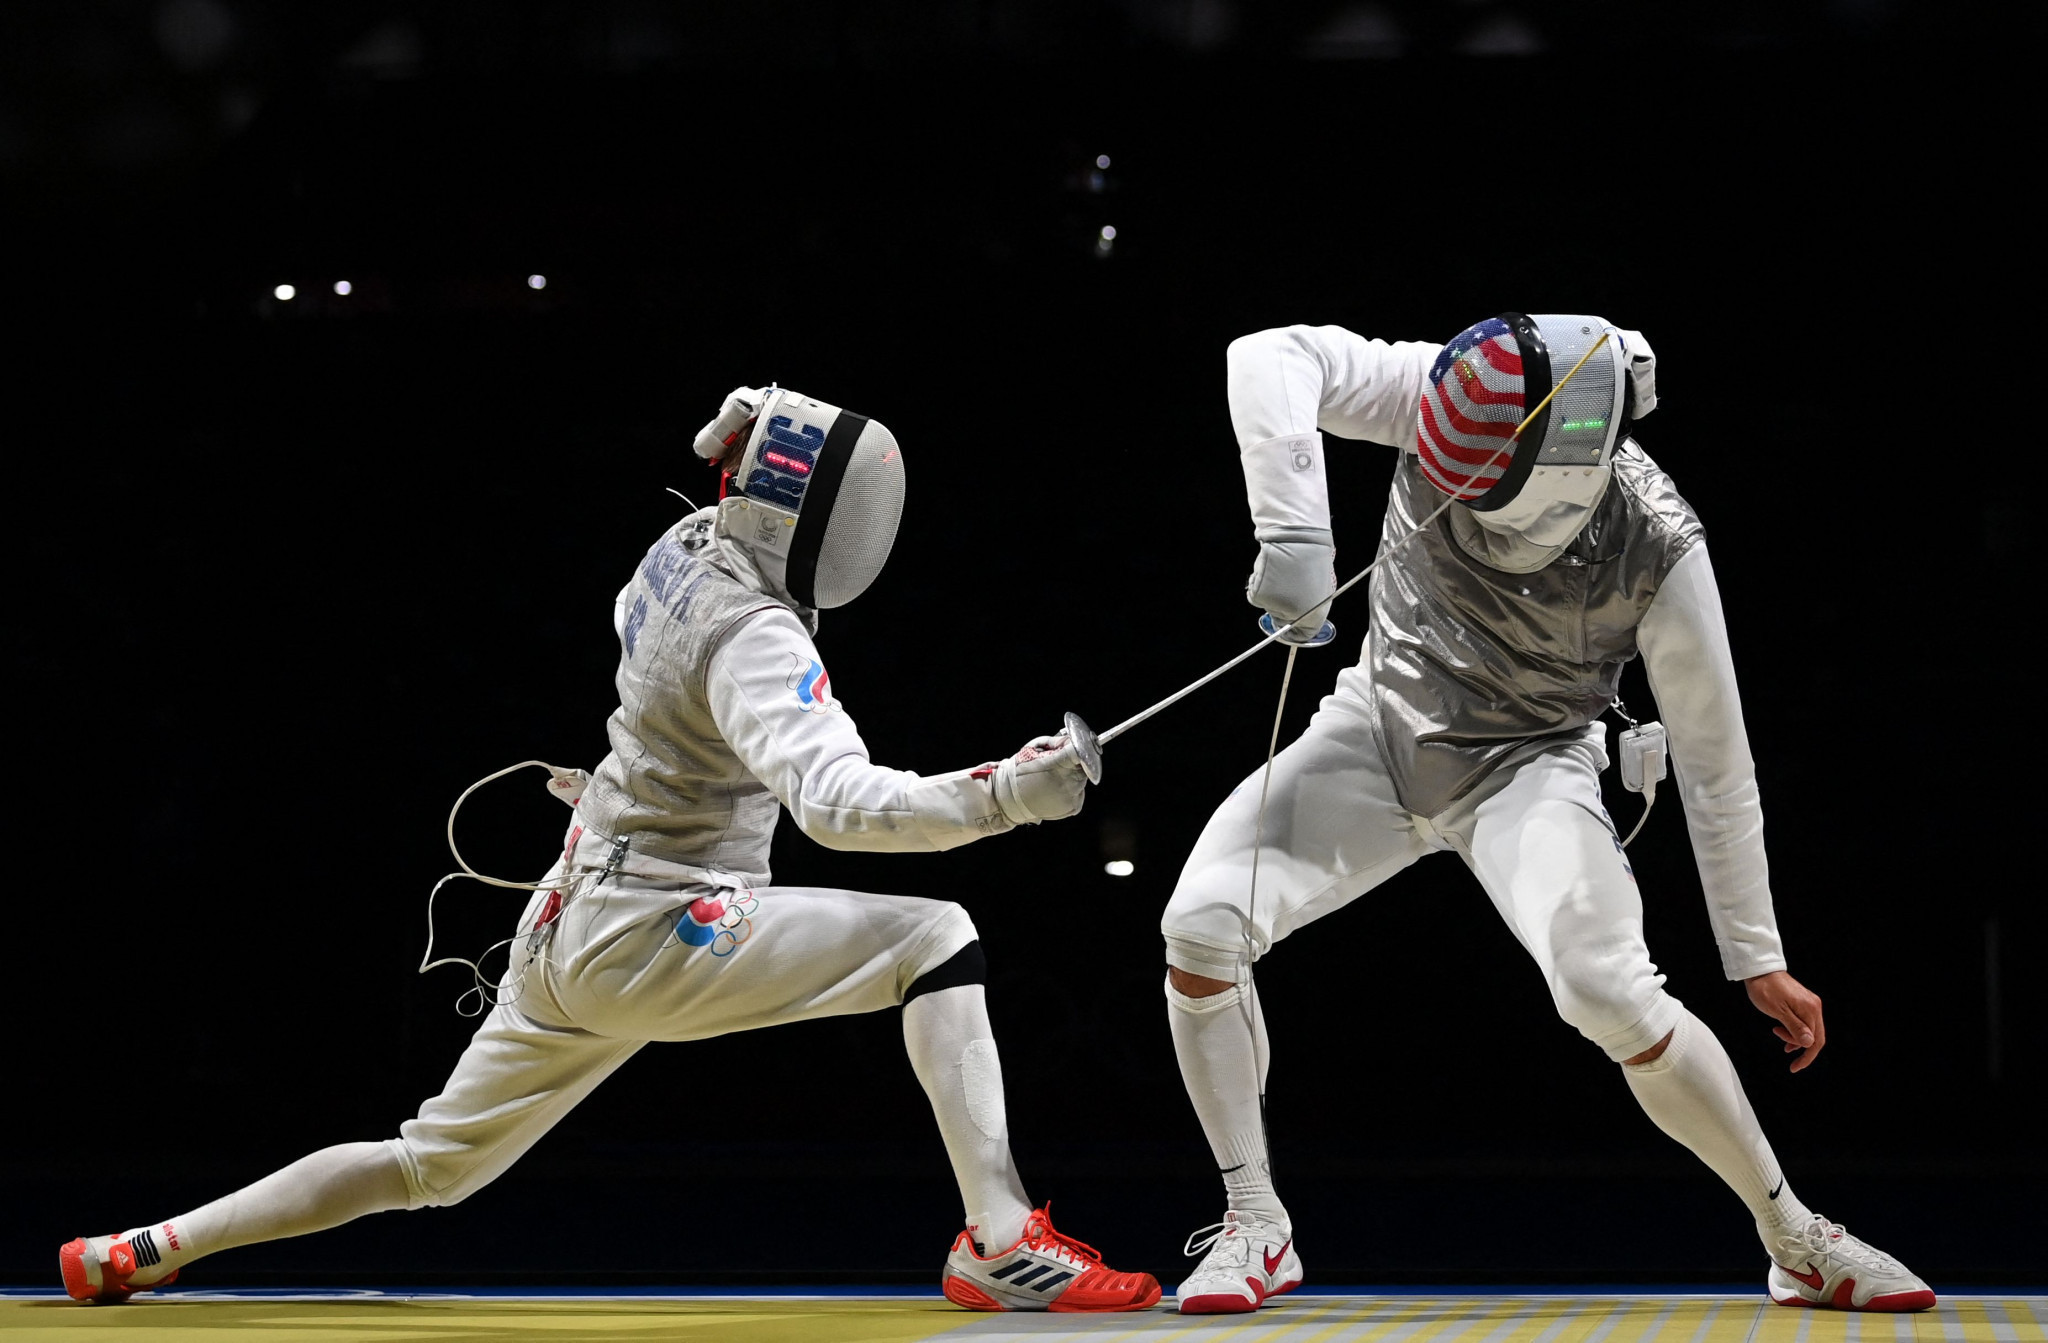 Programmes under the Fencing the Gap initiative include fee waivers for North American Cup events ©Getty Images